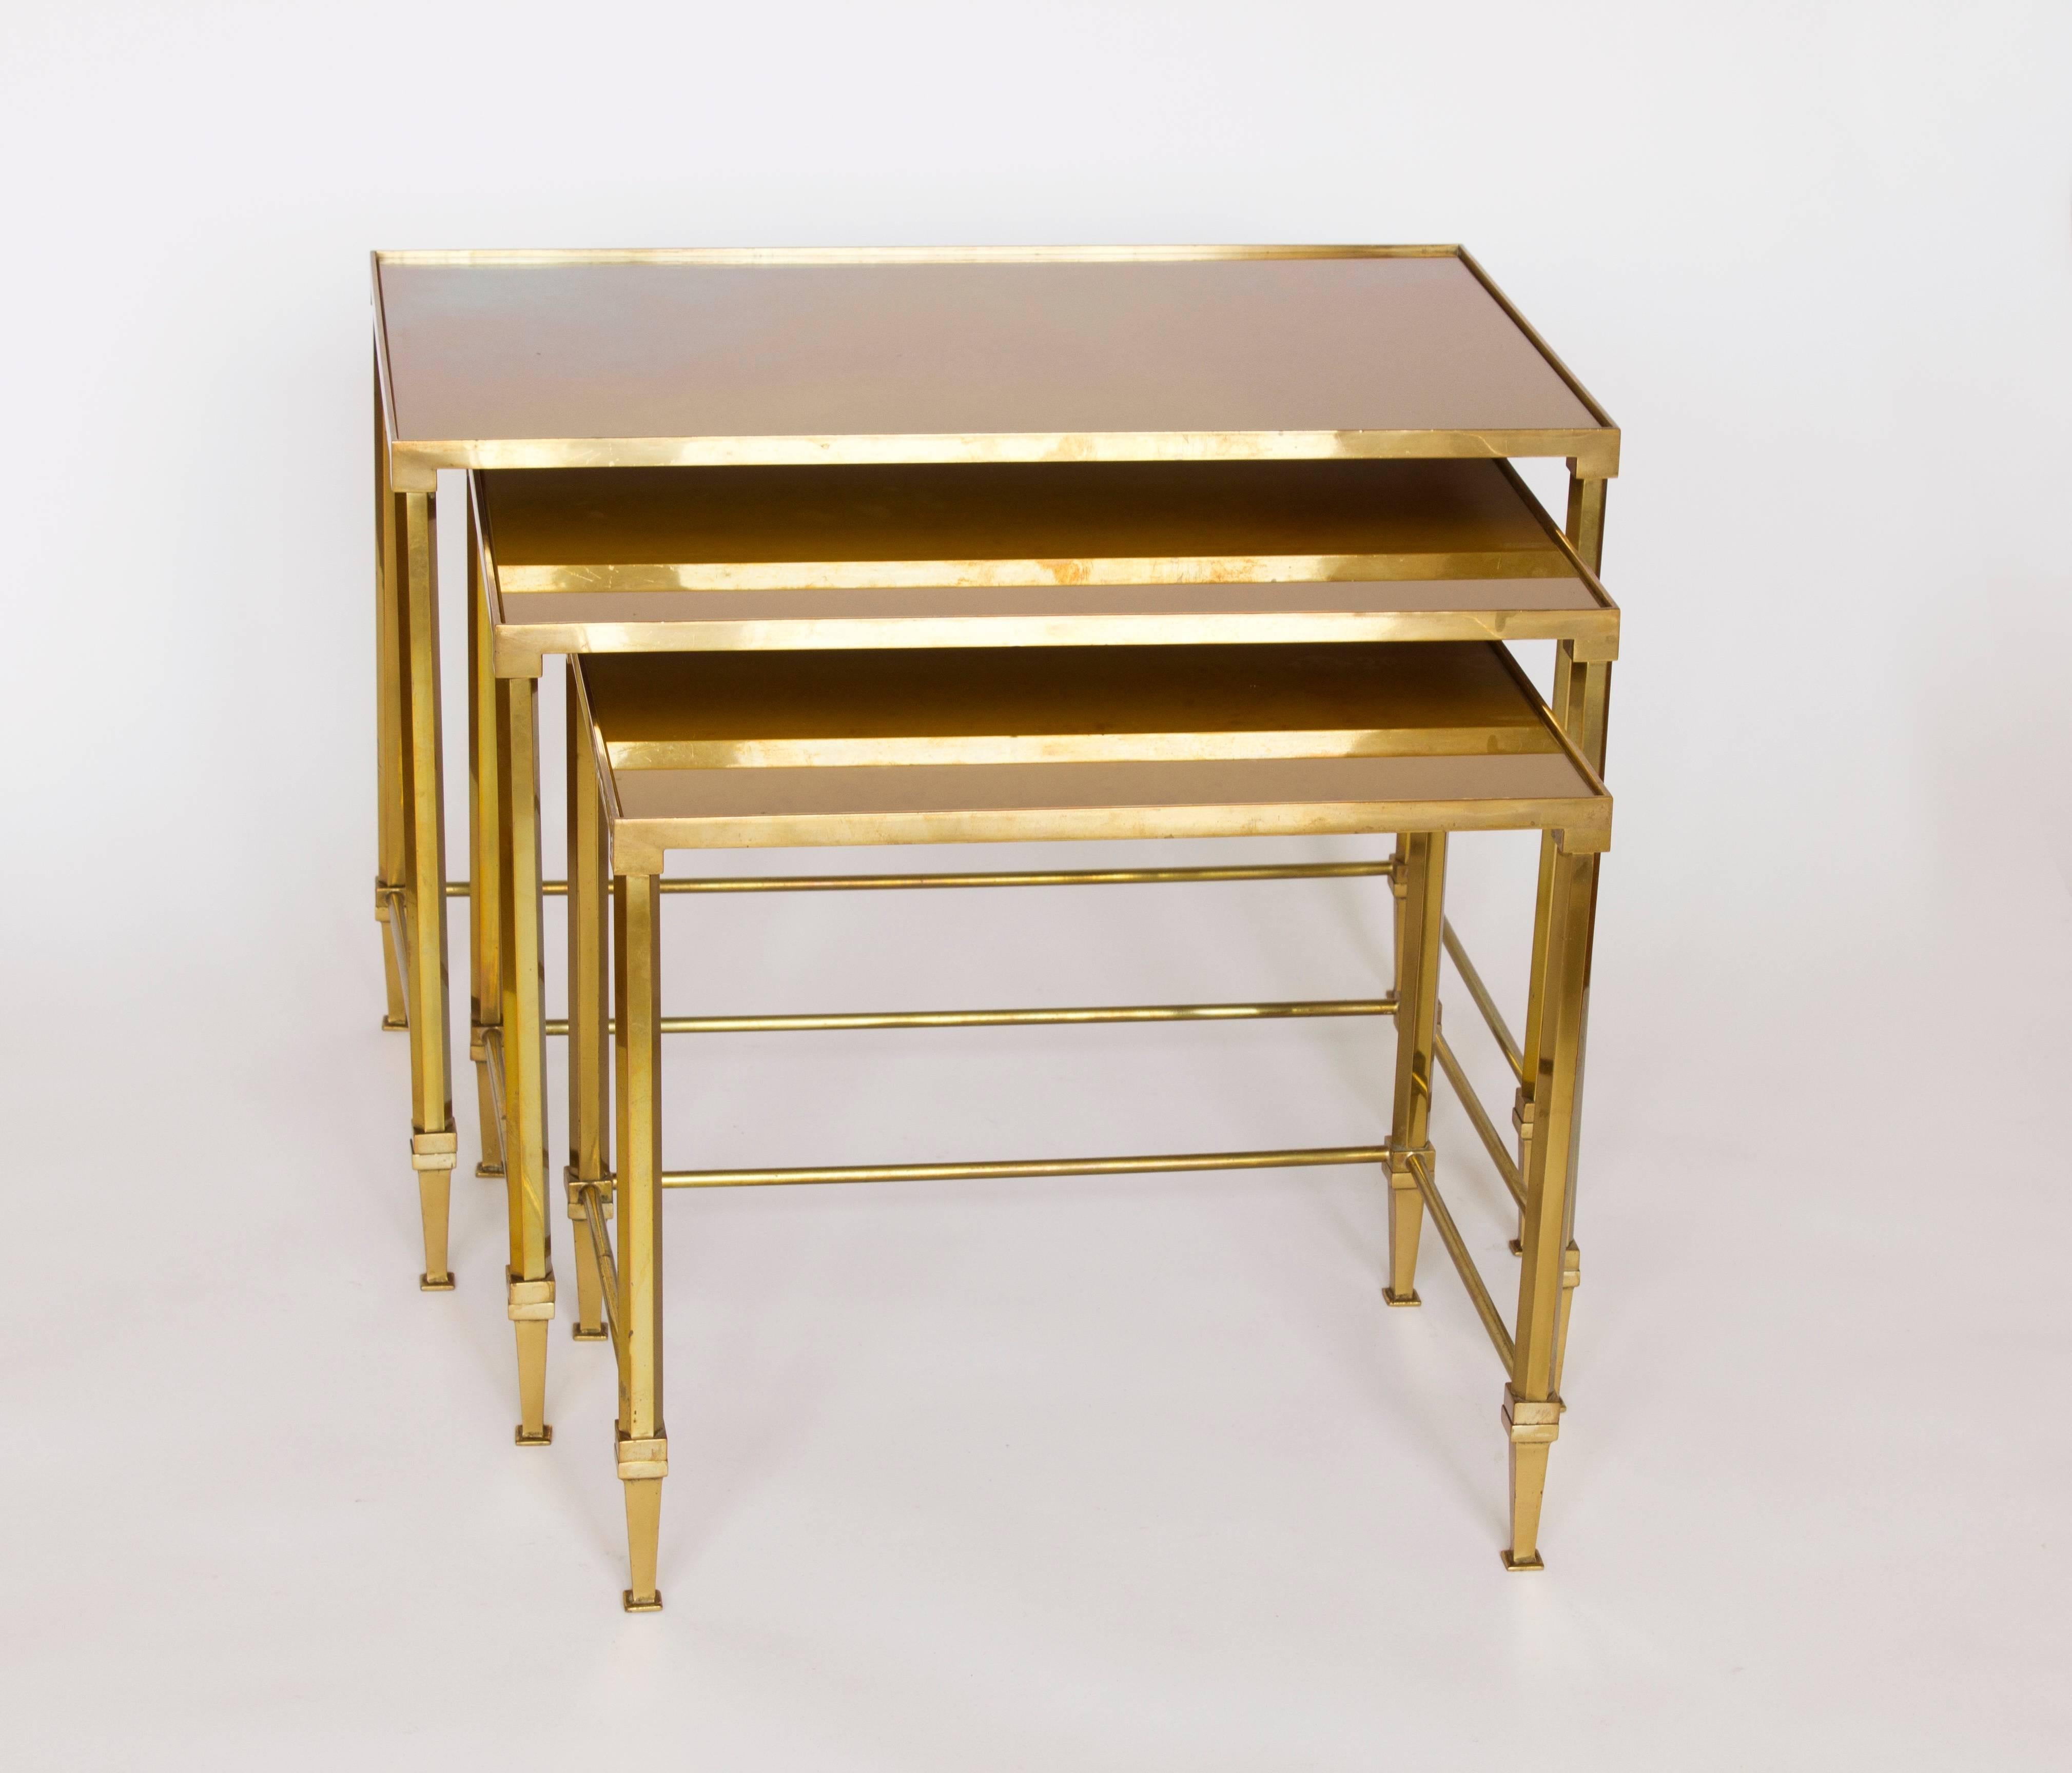 France, 1950s. From Maison Jansen.
Beautiful ensemble of brass nesting tables with patinated ochre-gold mirrored top.
With modern neoclassical feel.
Very good condition.

H x W x D
Large table: 41 cm x 55 cm x 33 cm
Middle table: 38 cm x 47 cm x 30